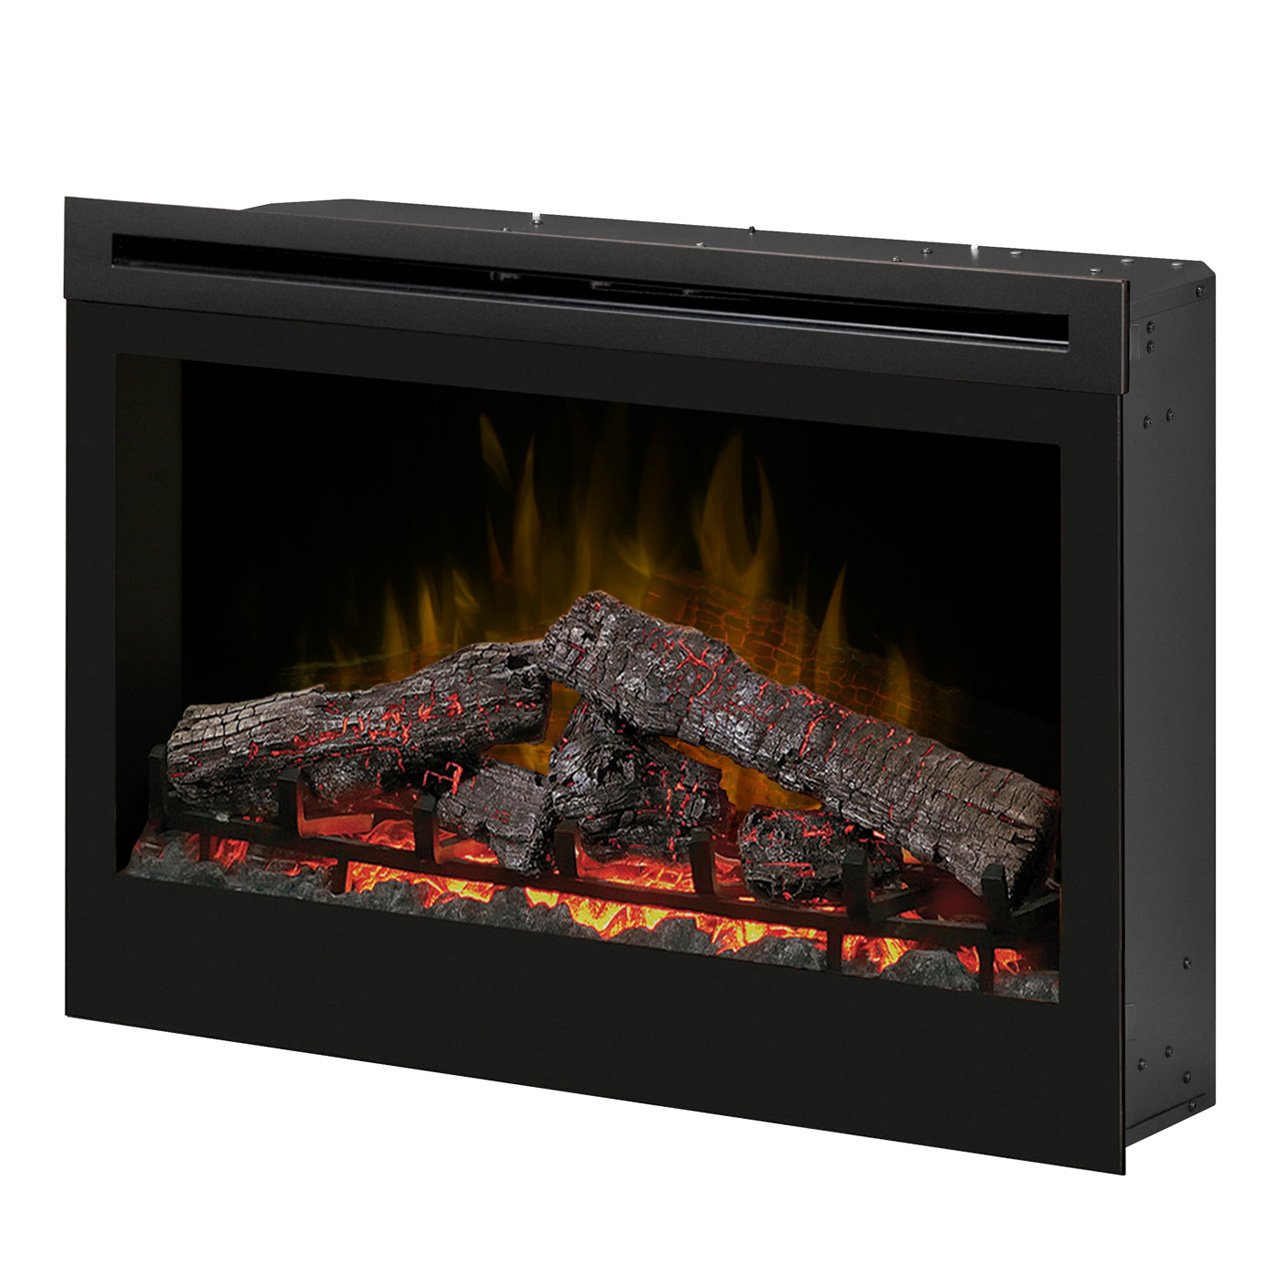 Best Electric Fireplace Logs Beautiful Dimplex Df3033st 33 Inch Self Trimming Electric Fireplace Insert